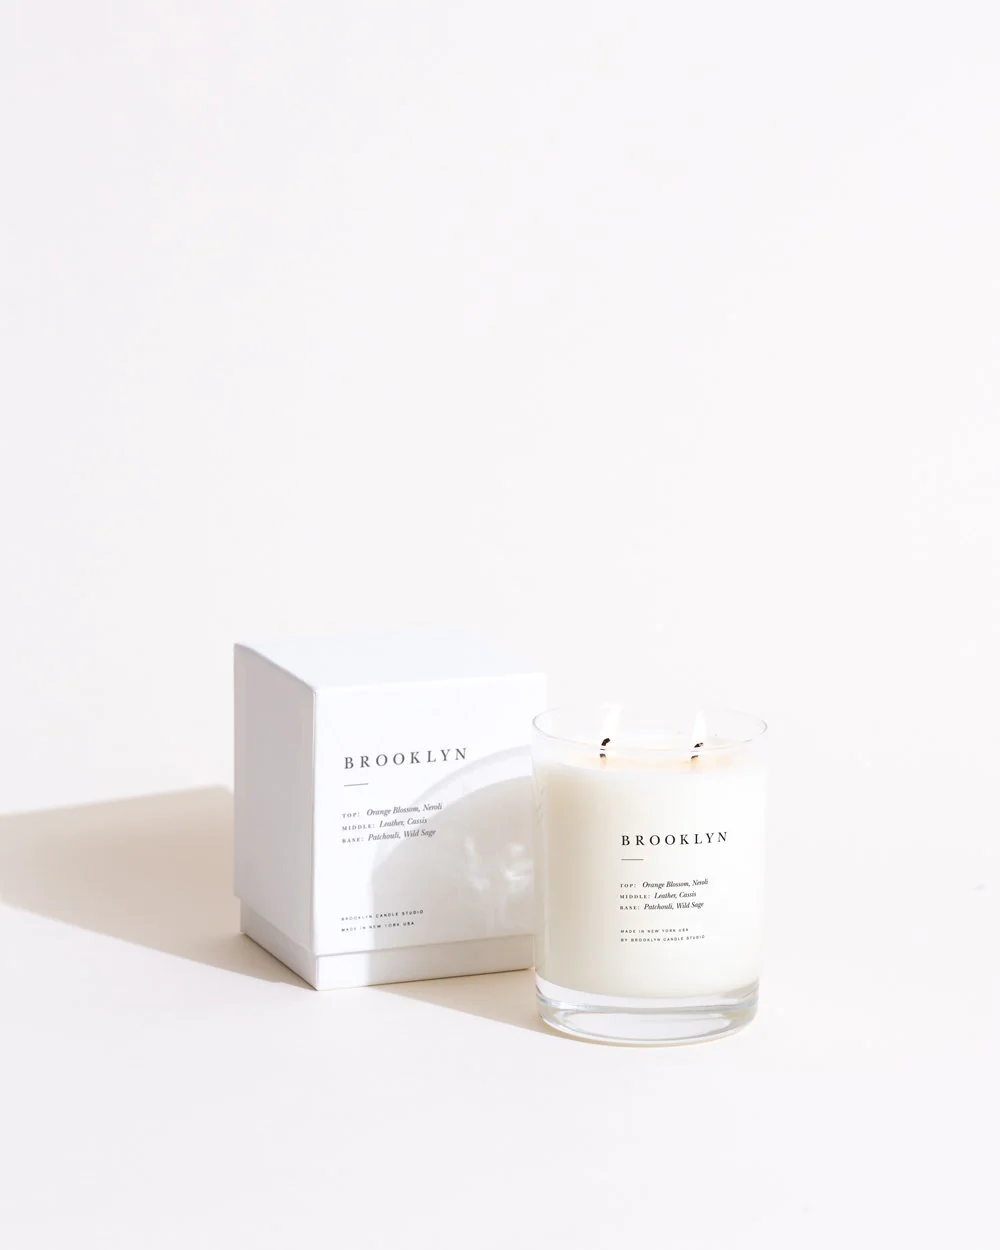 Brooklyn Candle Studio Brooklyn Scented Candle - Osmology Scented Candles & Home Fragrance